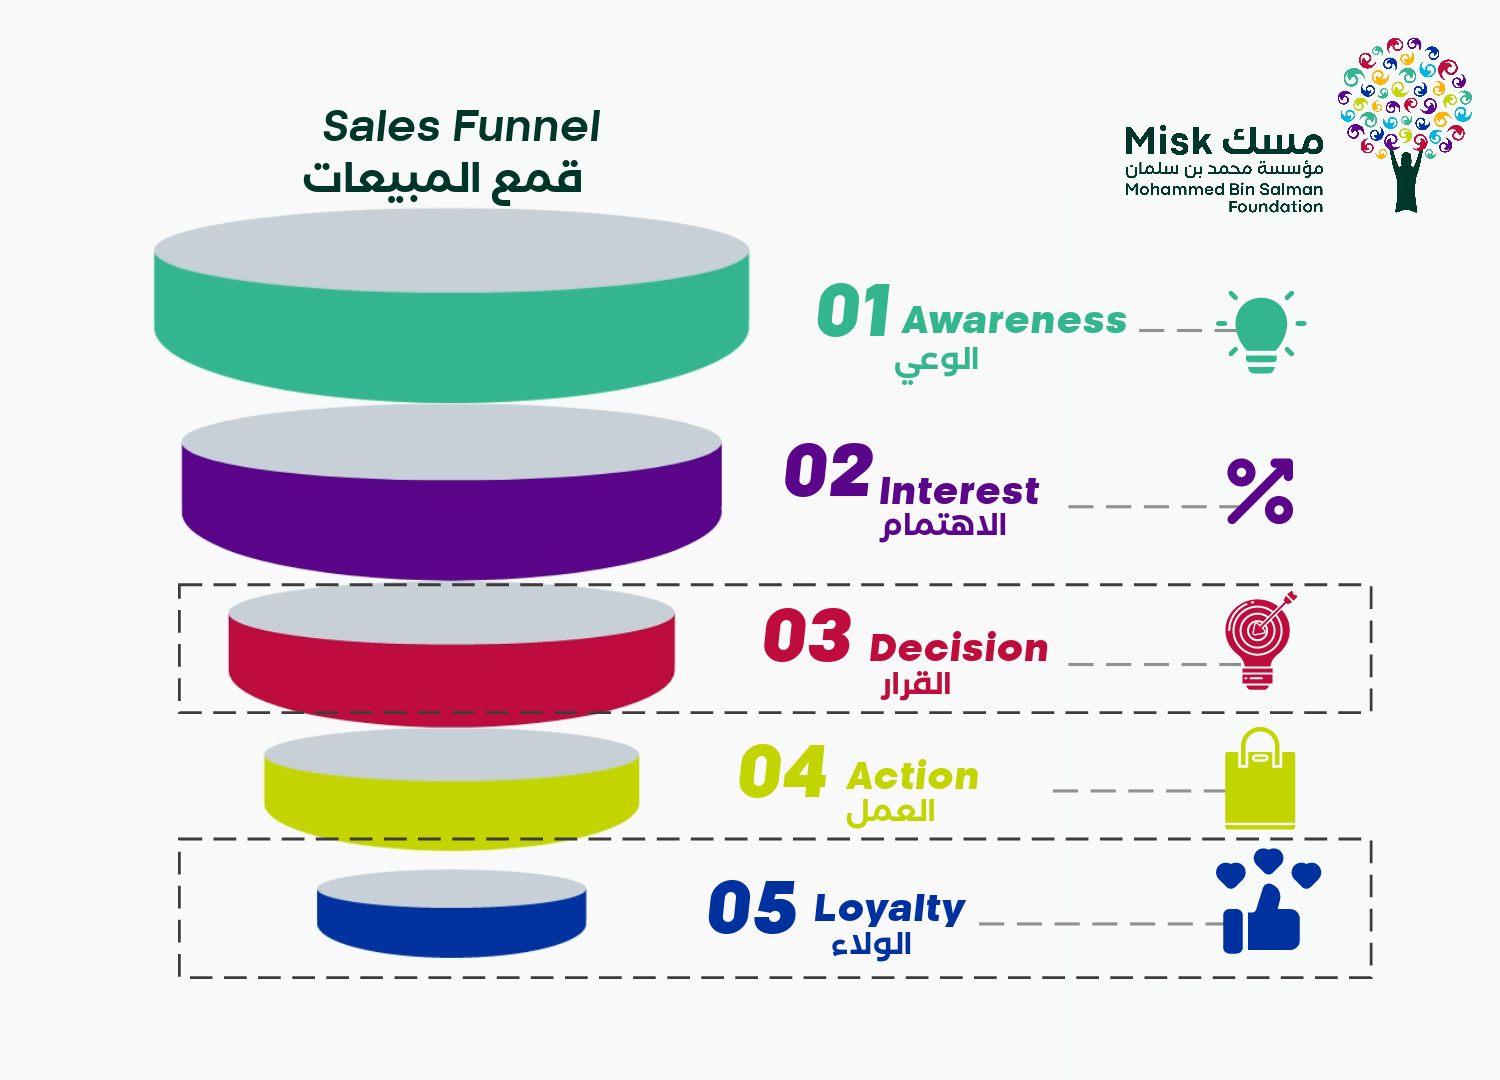 What are the stages of a sales funnel?